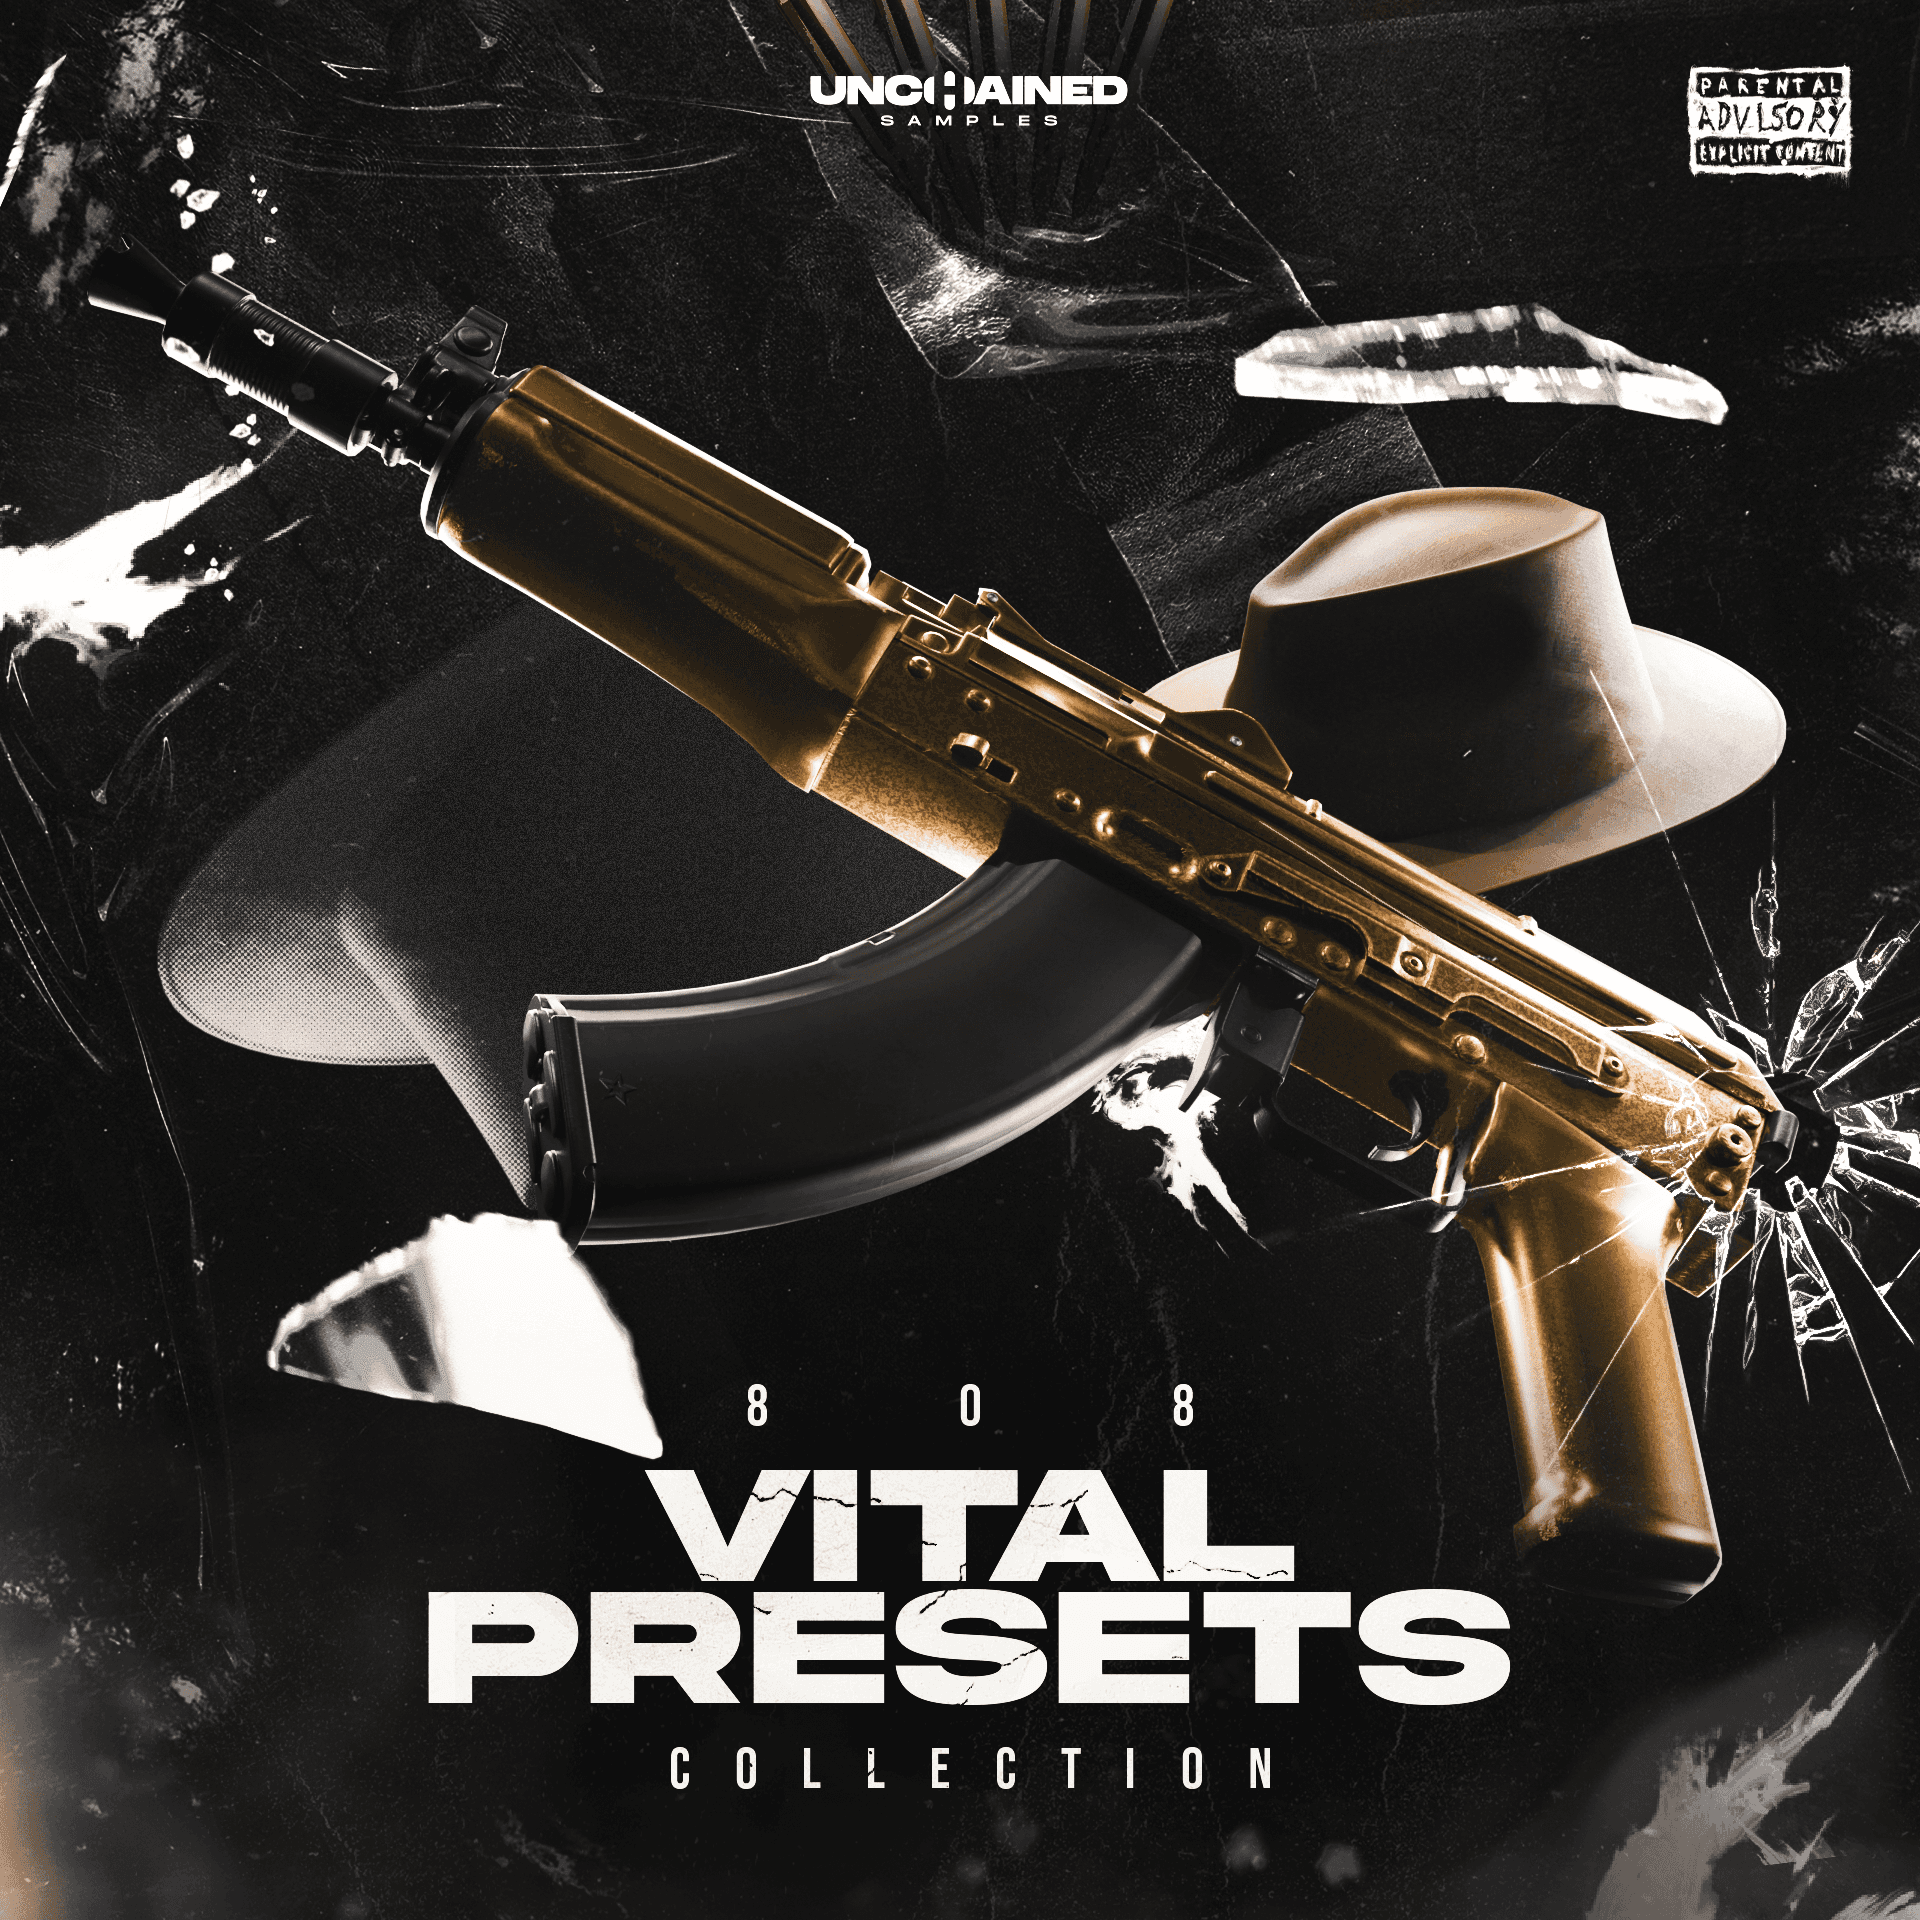 808 Vital Presets (Vol. 1) - Unchained Samples